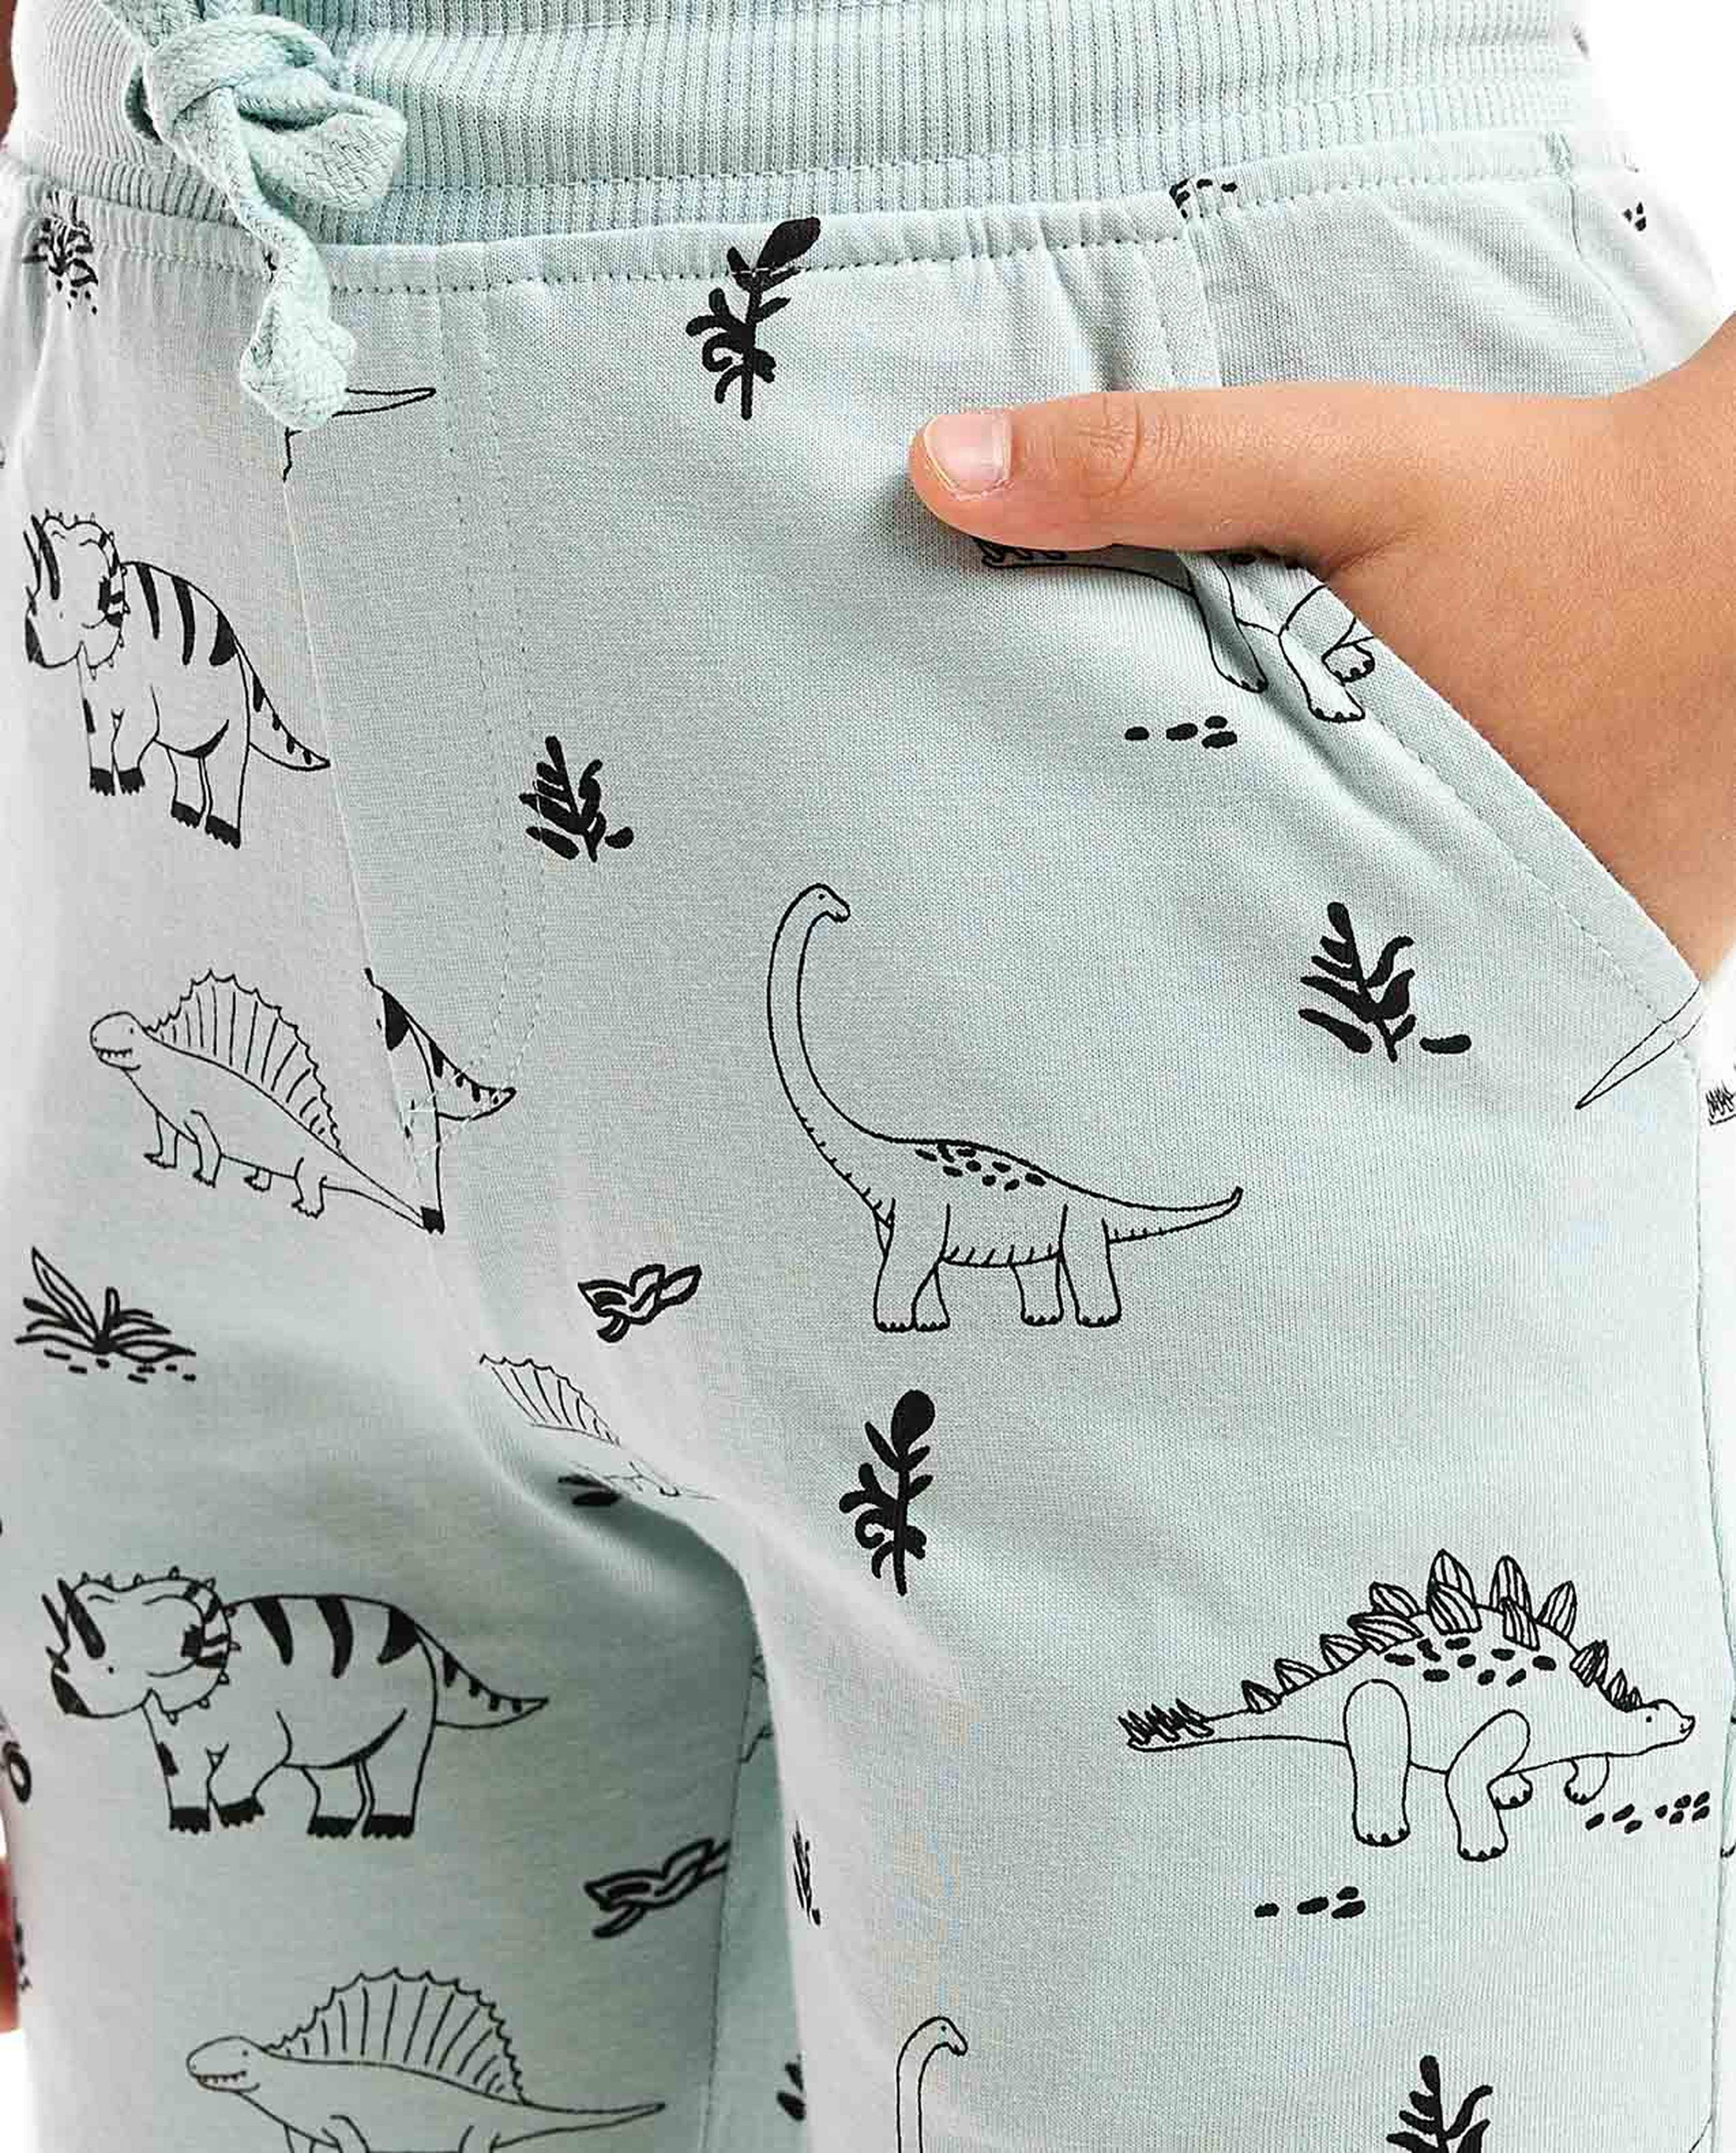 Pack Of 2 Printed Shorts with Drawstring Waist